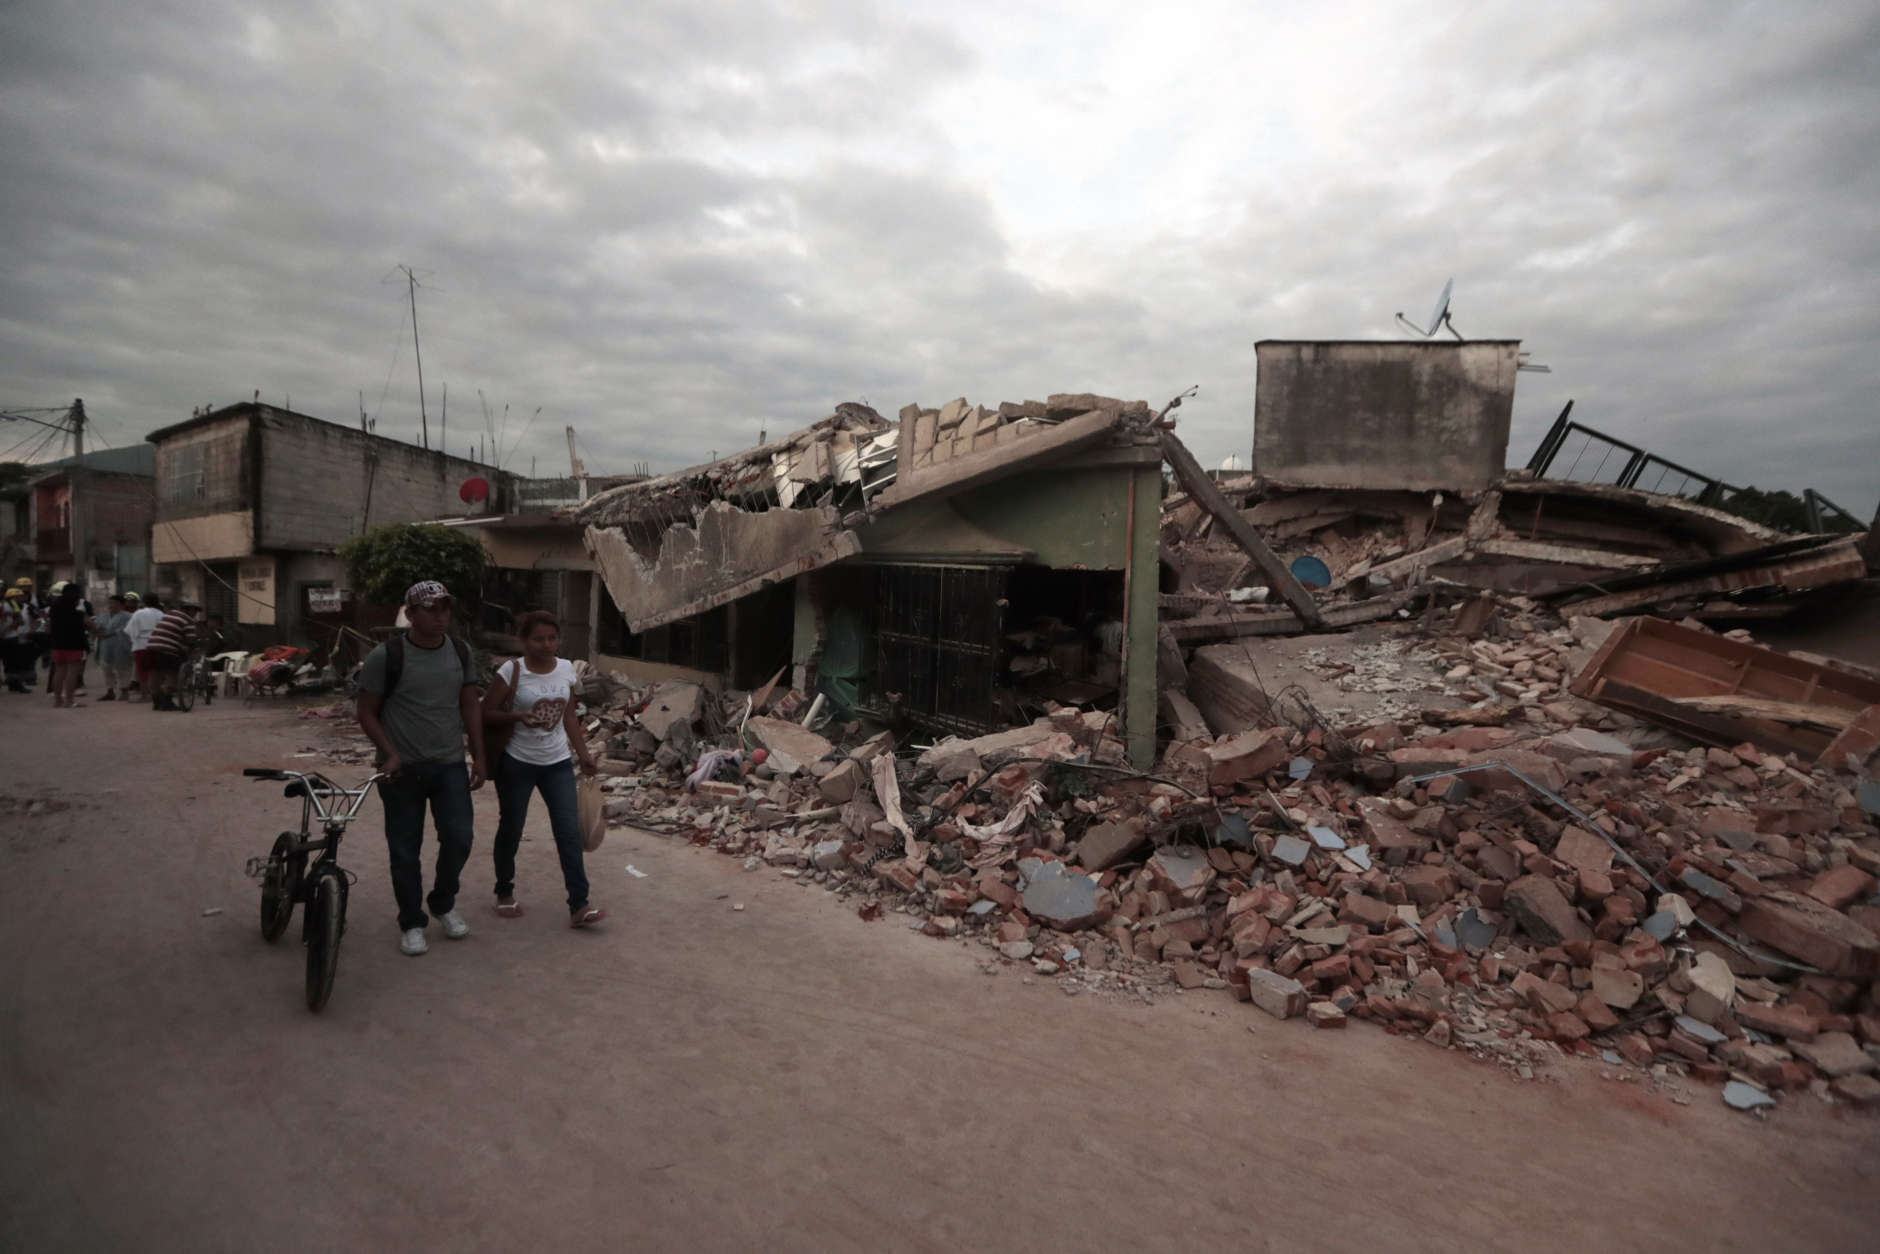 Residents walk past buildings demolished by a 7.1 earthquake, in Jojutla, Morelos state, Mexico, Wednesday, Sept. 20, 2017. Police, firefighters and ordinary Mexicans are digging frantically through the rubble of collapsed schools, homes and apartment buildings, looking for survivors of Mexico's deadliest earthquake in decades as the number of confirmed fatalities climbed to 248. (AP Photo/Eduardo Verdugo)